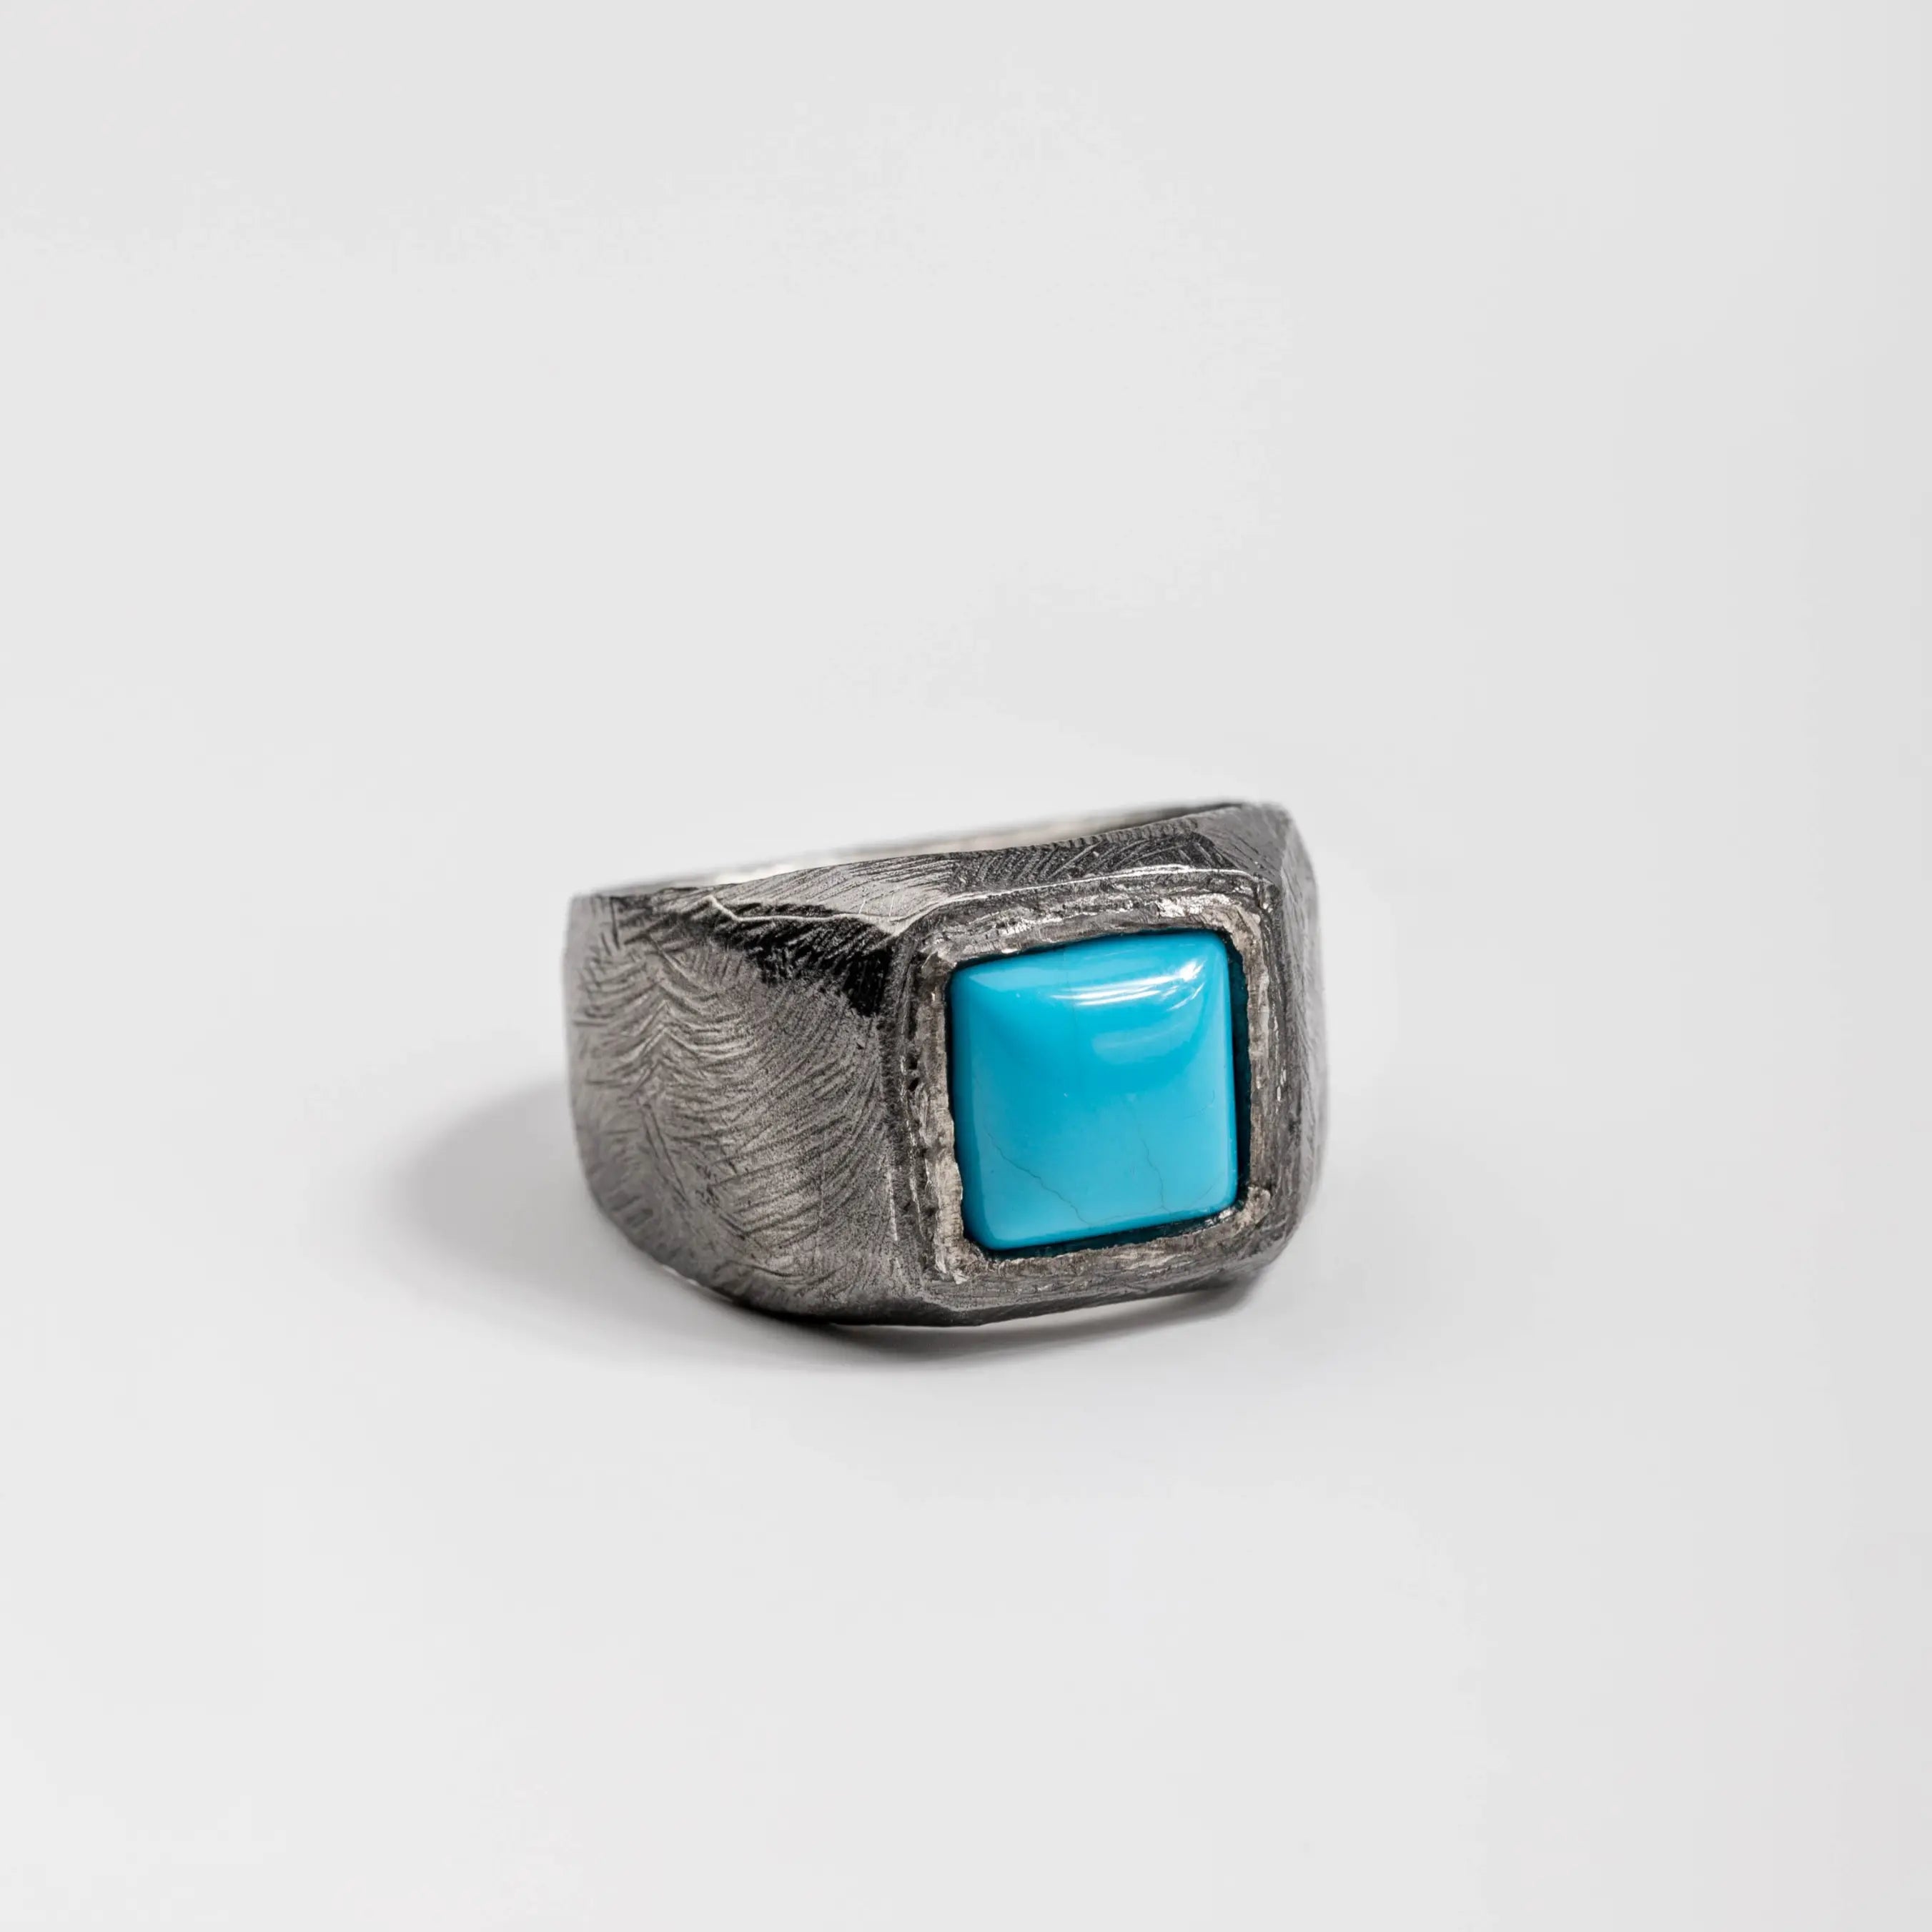 Signet Turquoise Ring Oxidized Silver 925